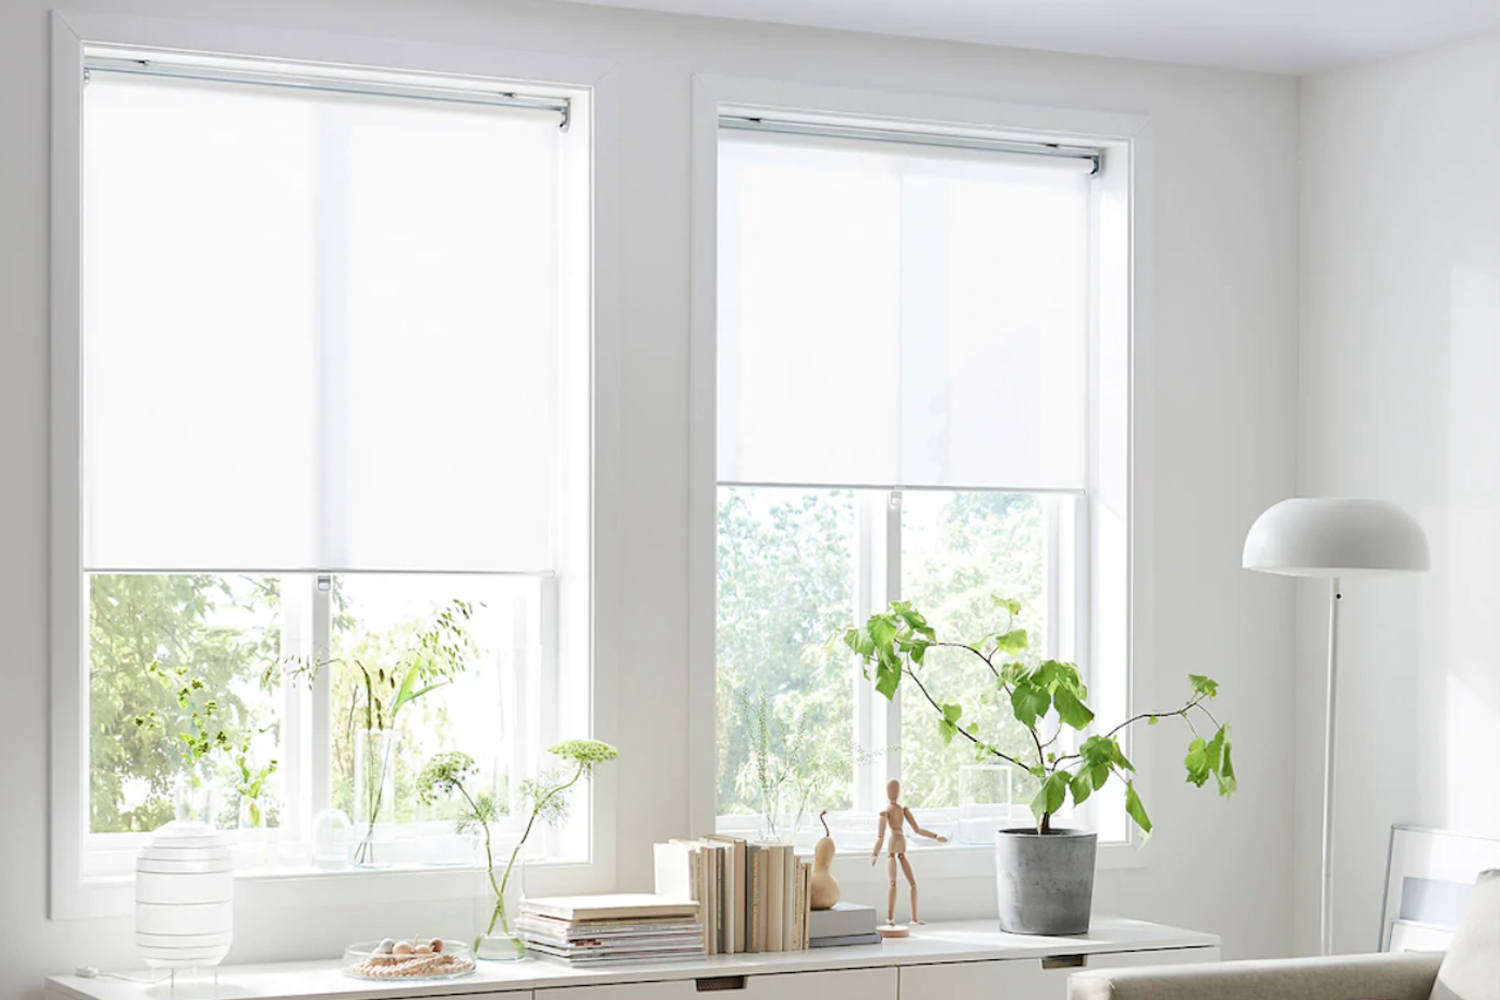 Our Brand Ox Anno Semi-Sheer Roller Shade